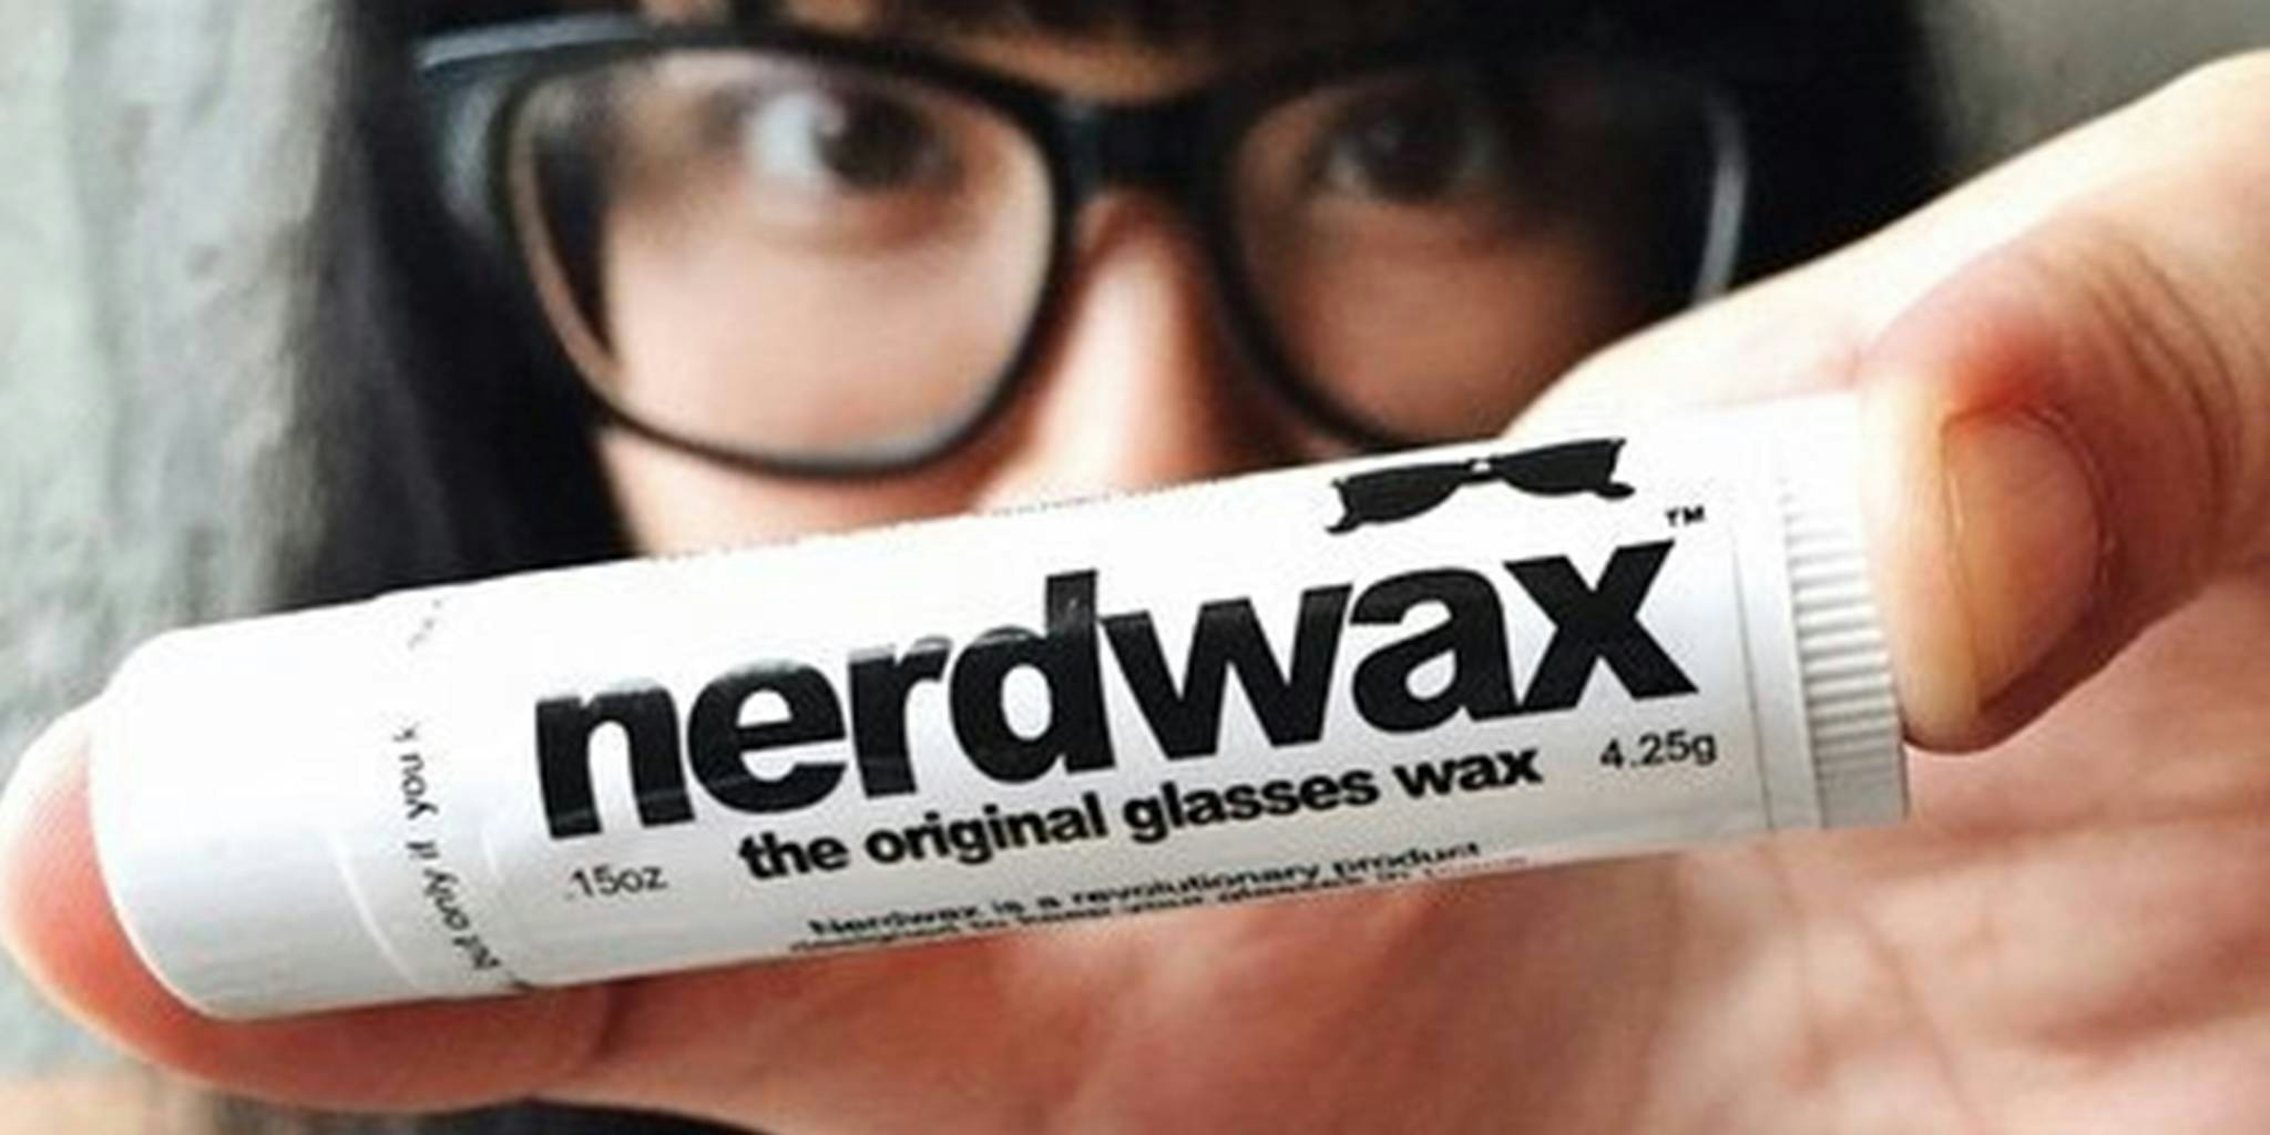 Tried and tested: Nerdwax